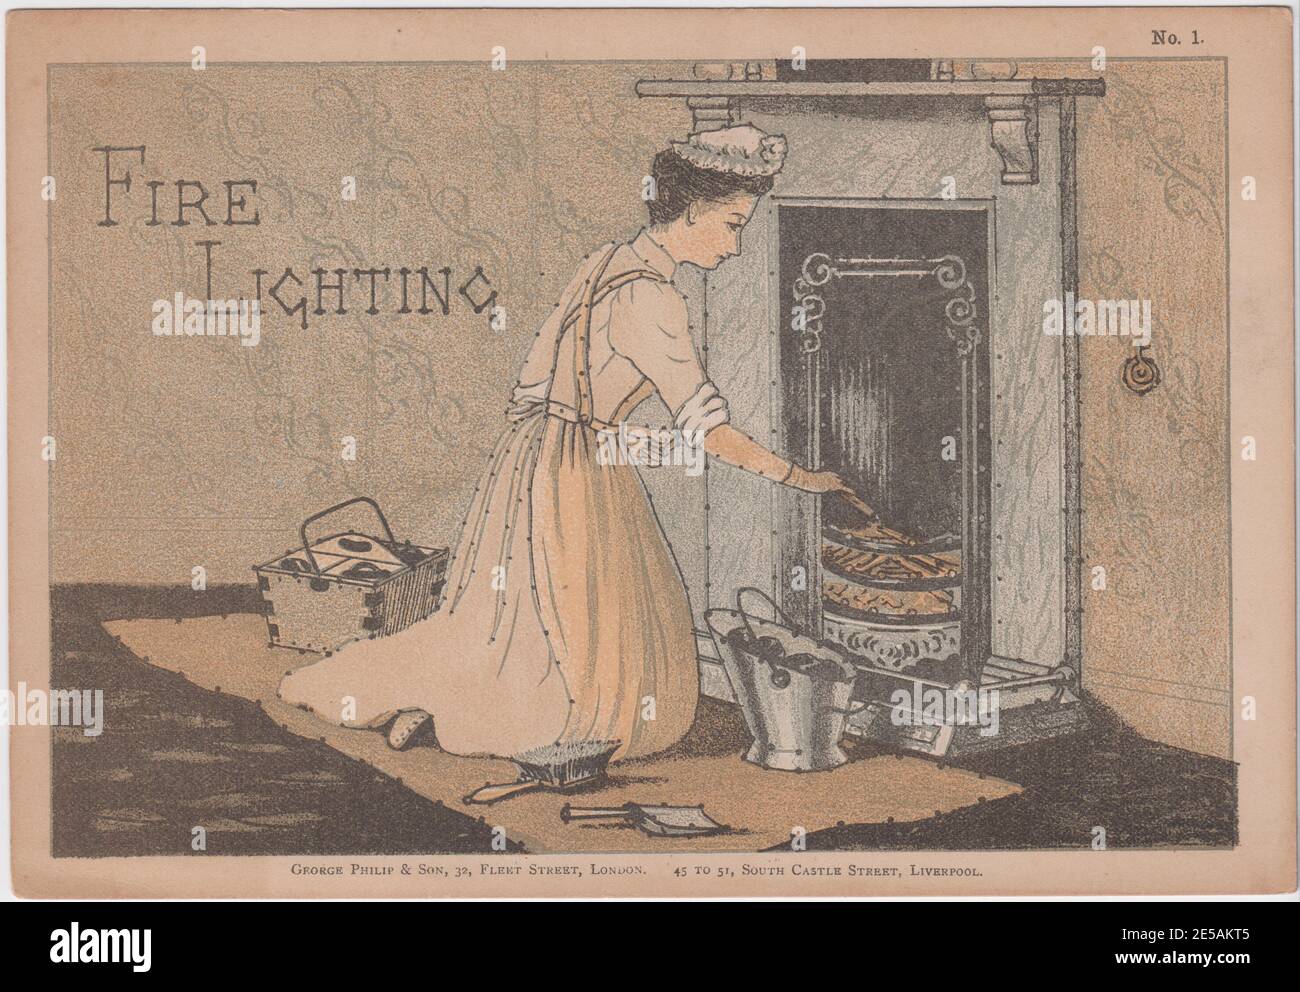 Fire lighting: Edwardian advertising image showing a servant setting a fire in the fireplace Stock Photo